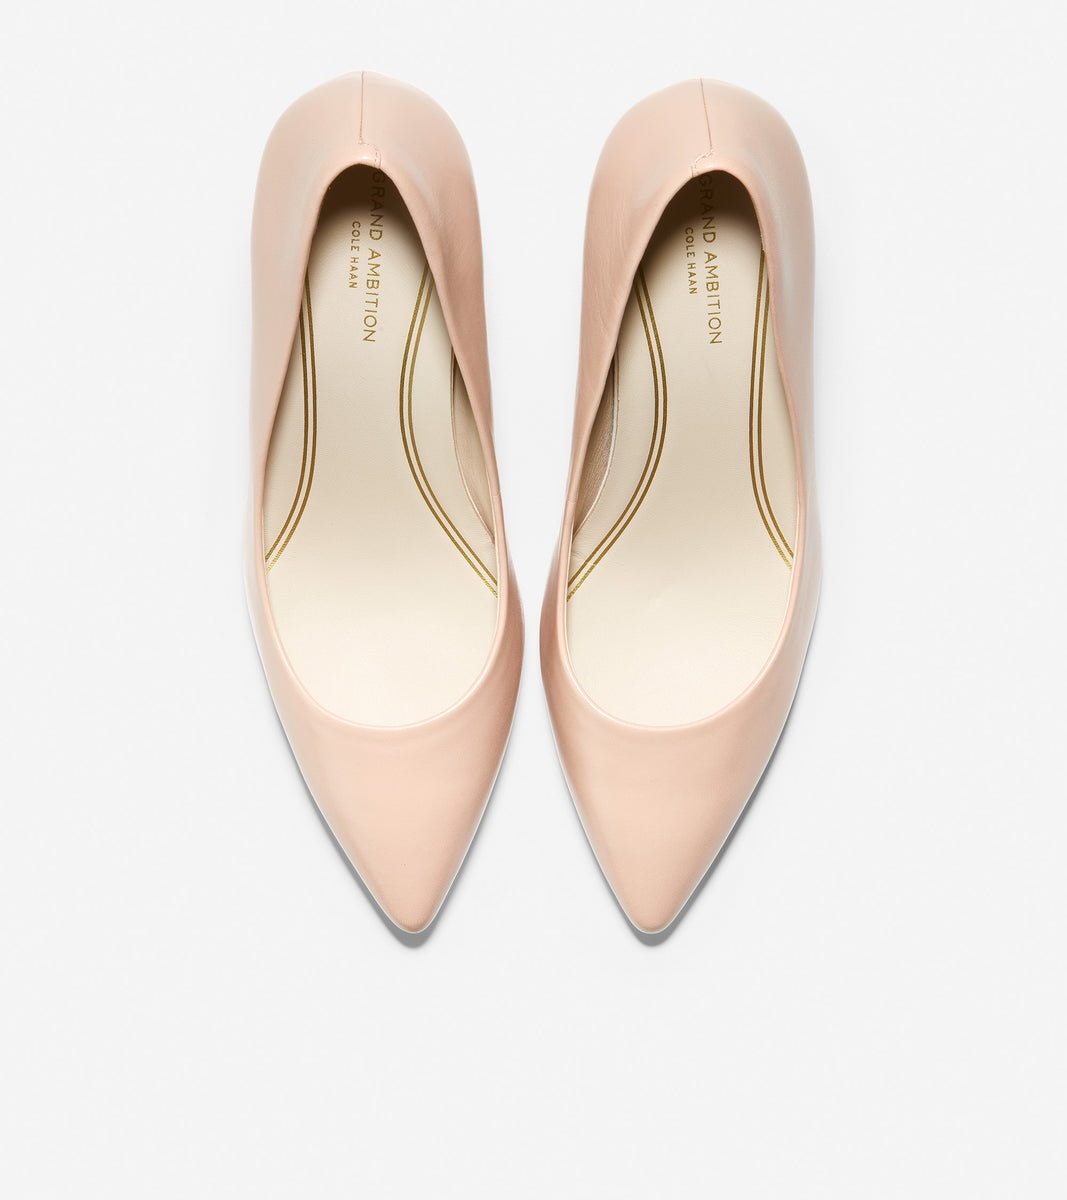 ColeHaan-Grand Ambition Pump-w15826-Mahogany Rose Leather